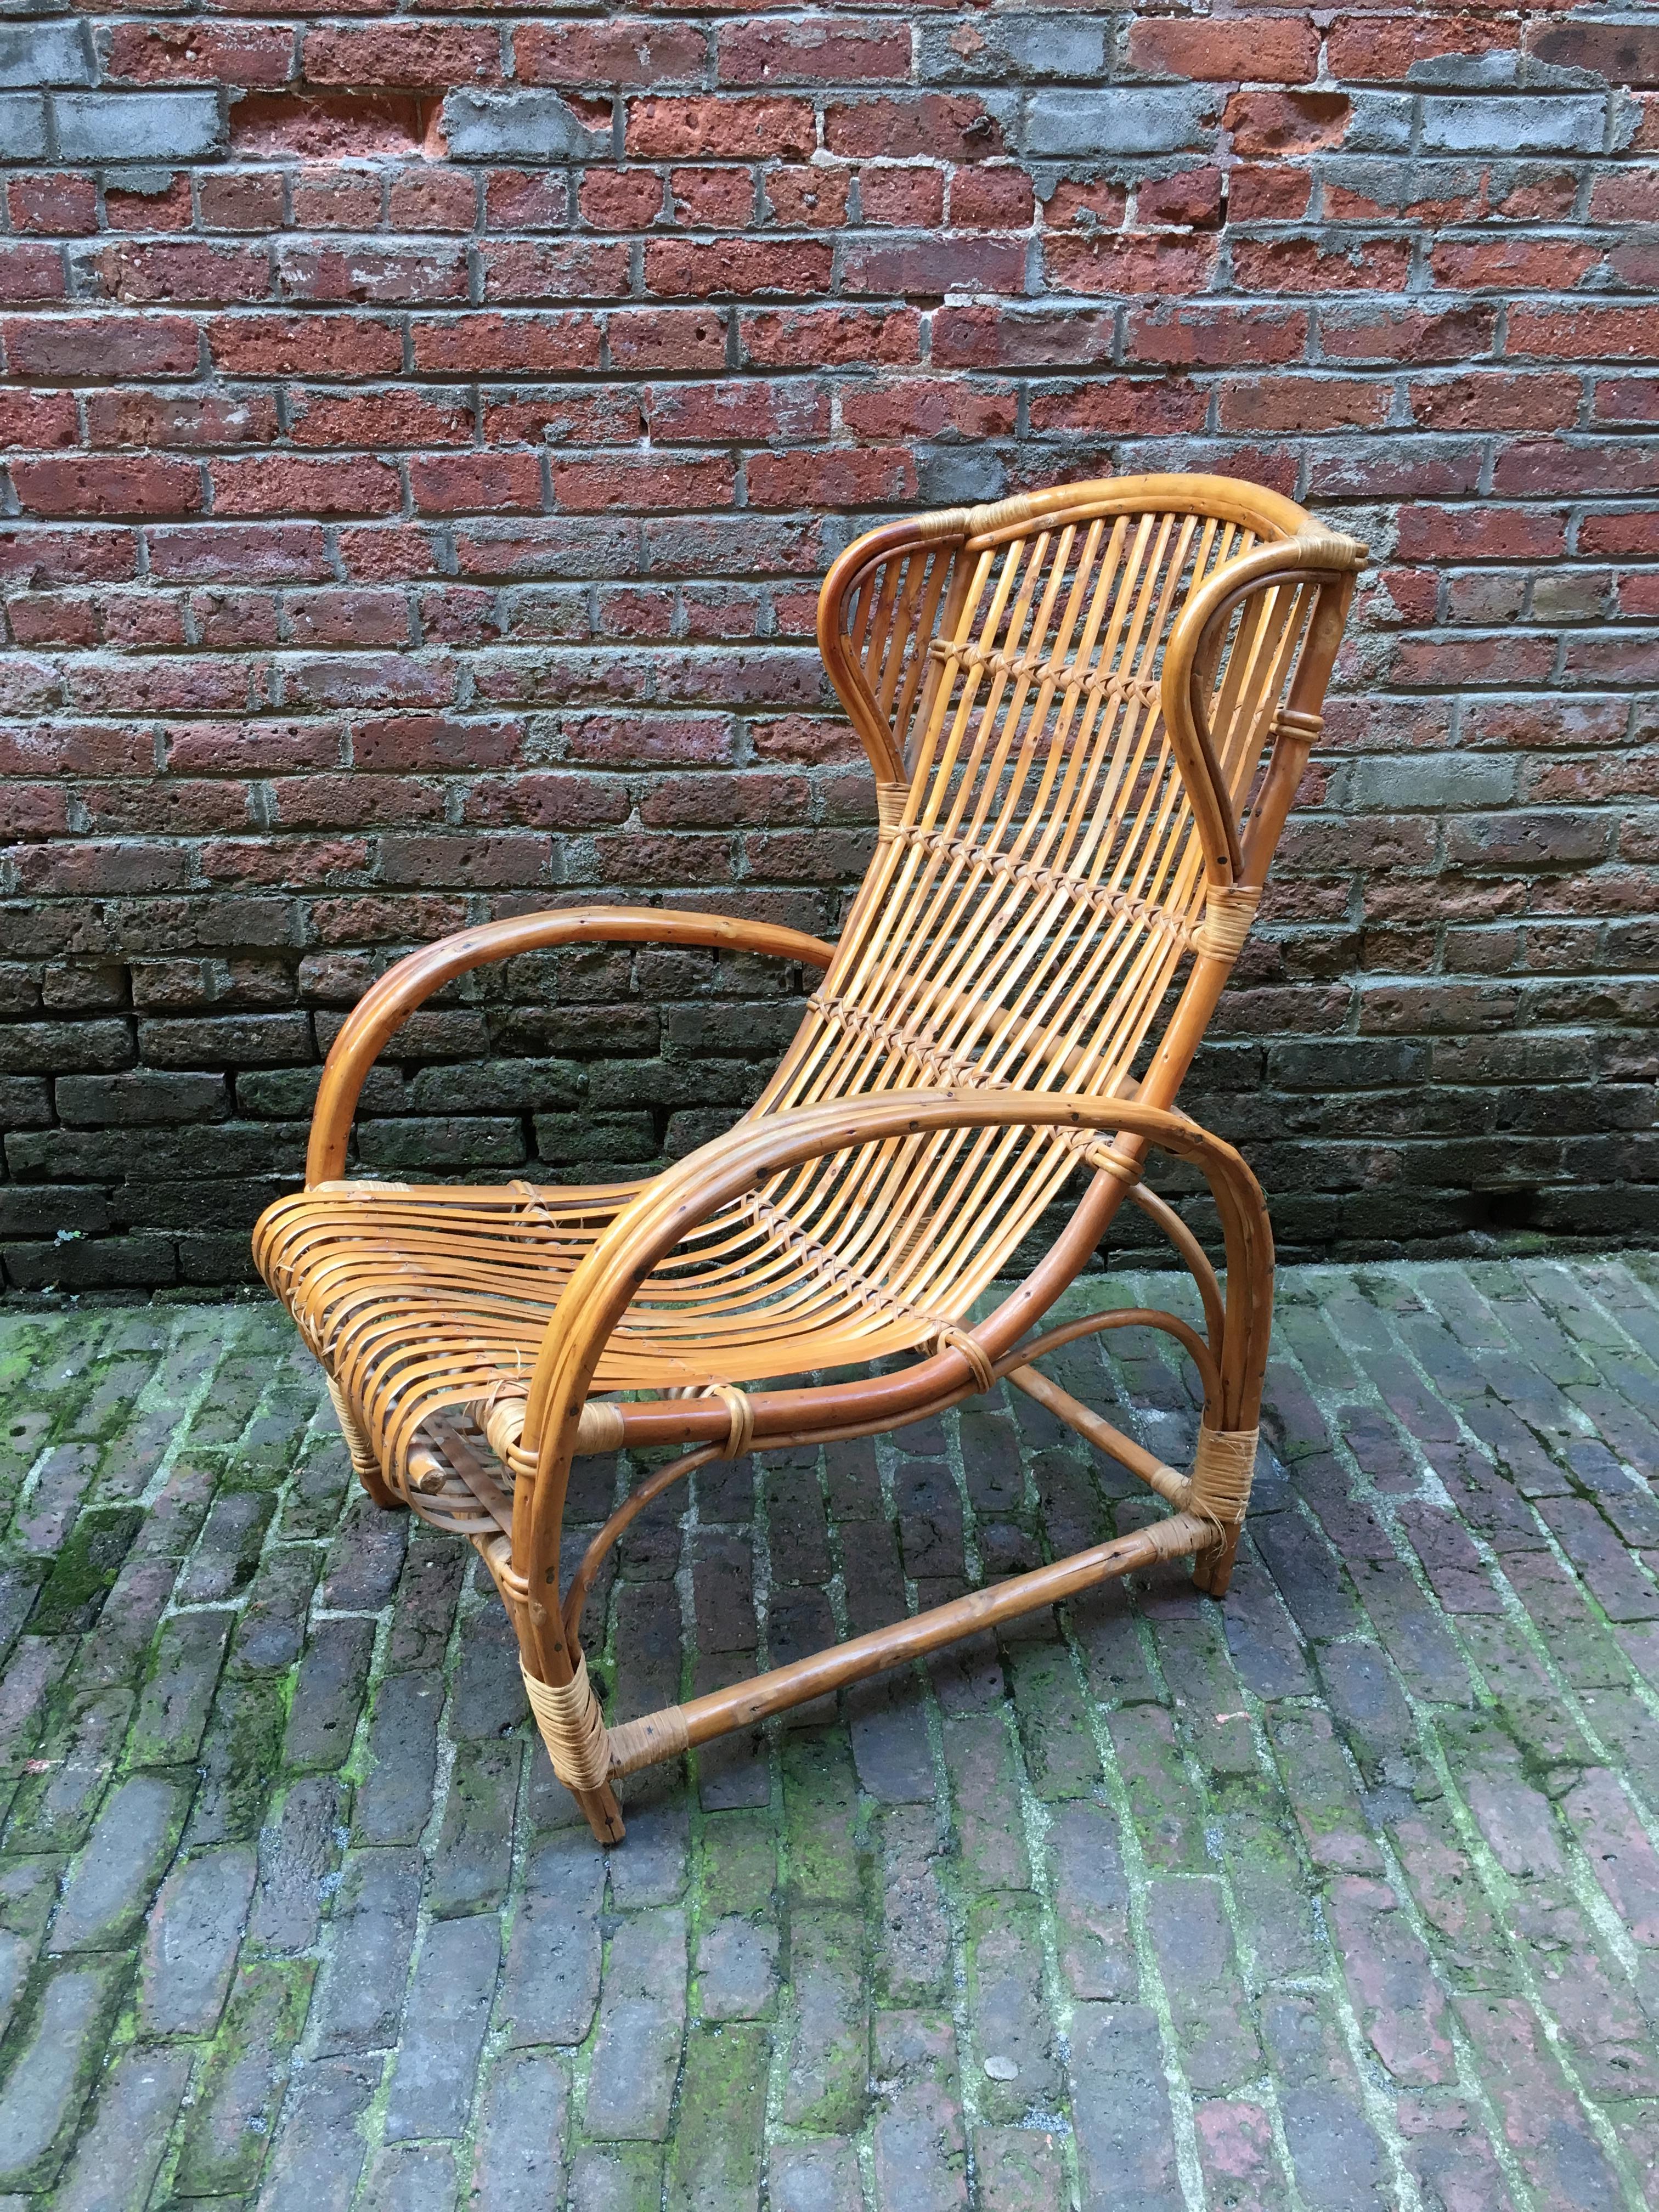 Quality rattan armchair in the manner of Gio Ponti, Tito Agnoli or Lio Carminati. Curved and contoured back for ultimate comfort, circa 1950-1960.